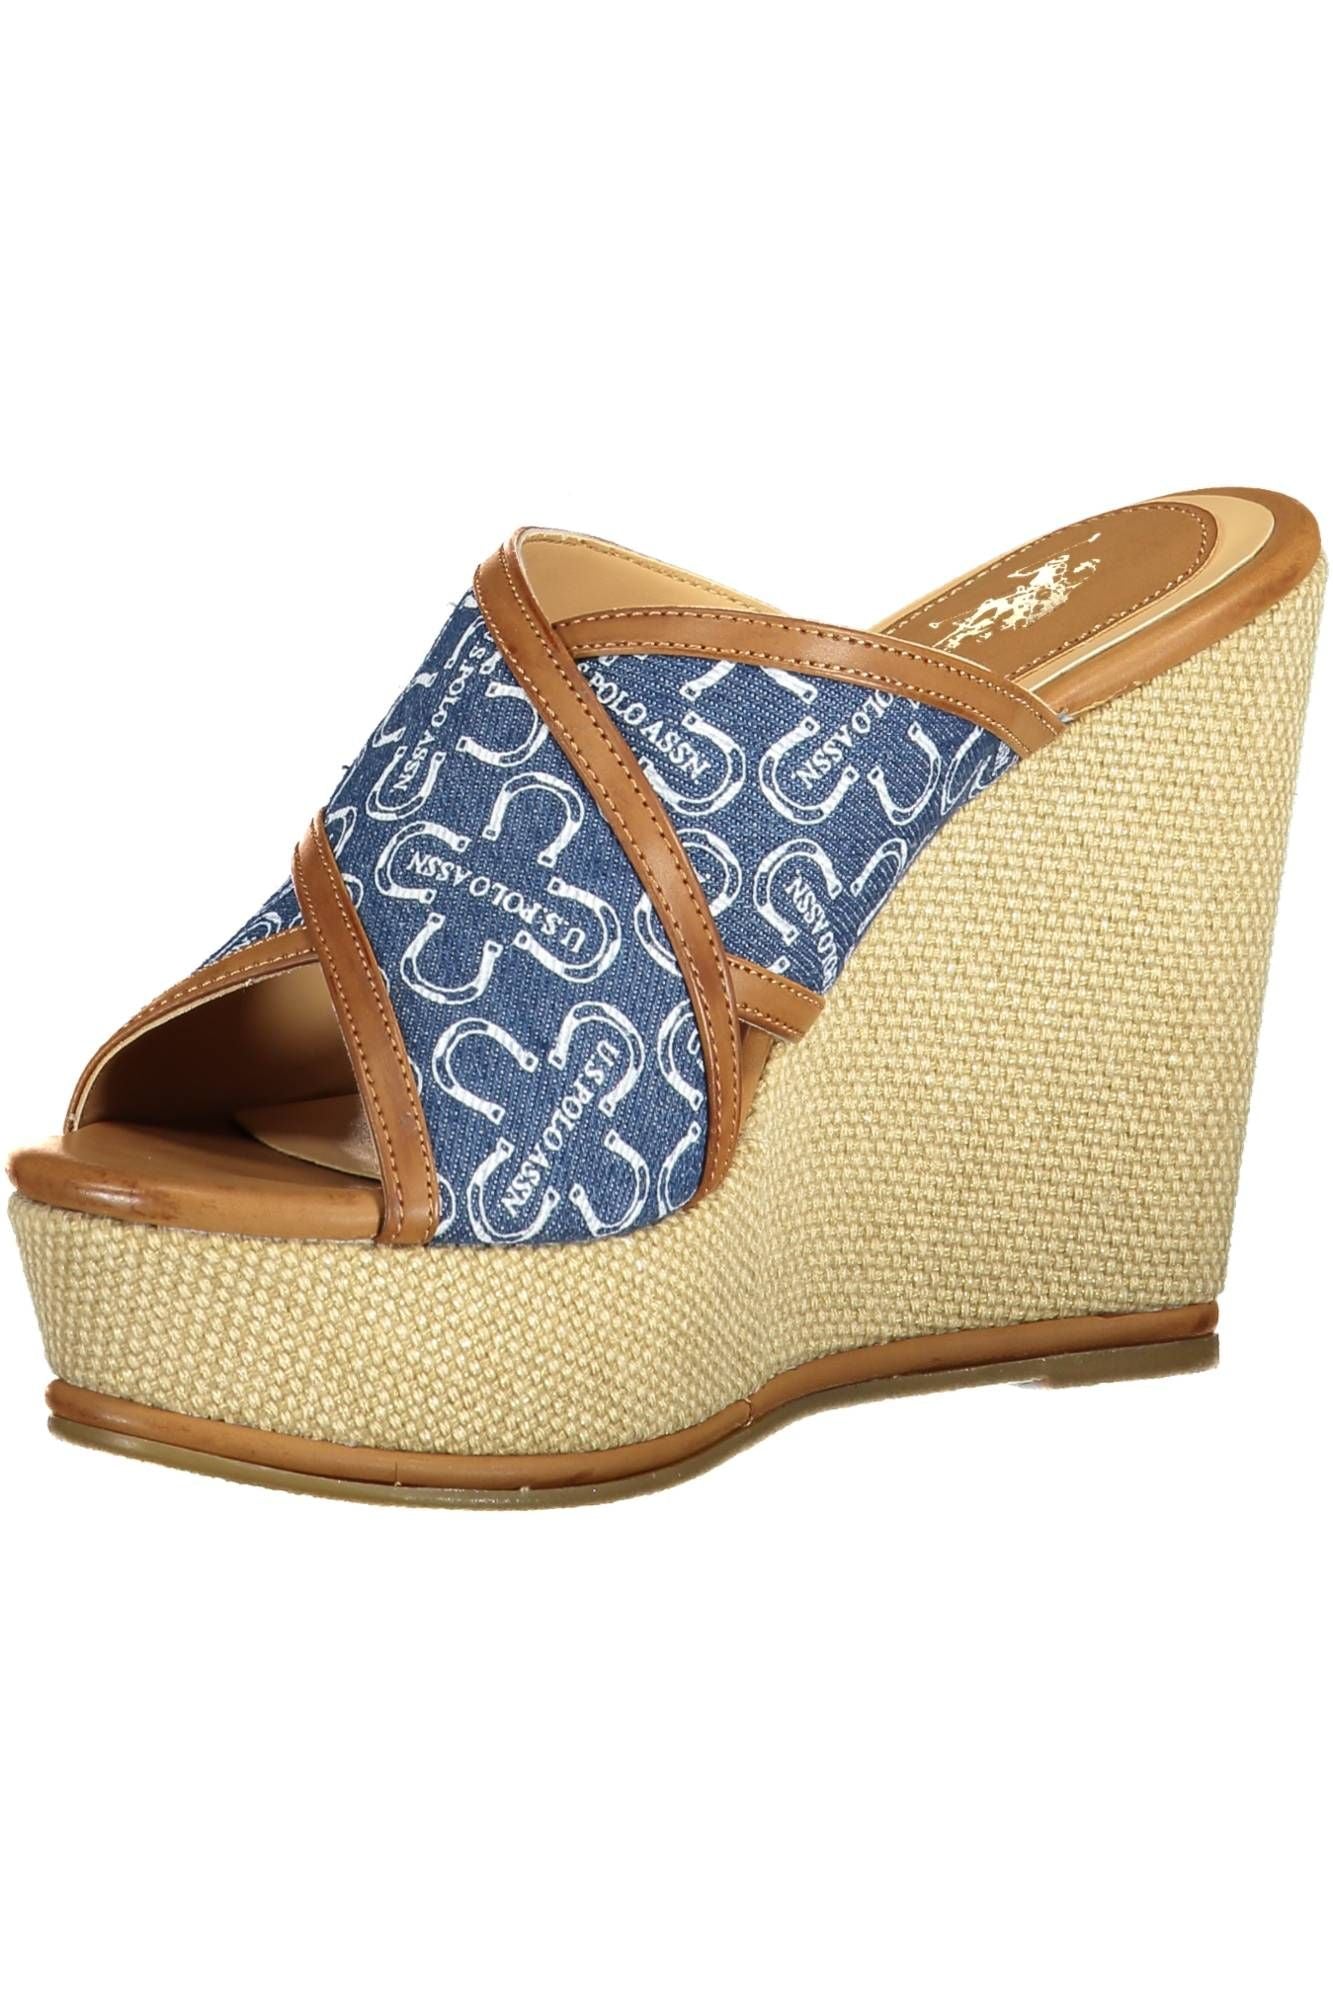 Chic Blue Wedge Sandals with Logo Accent